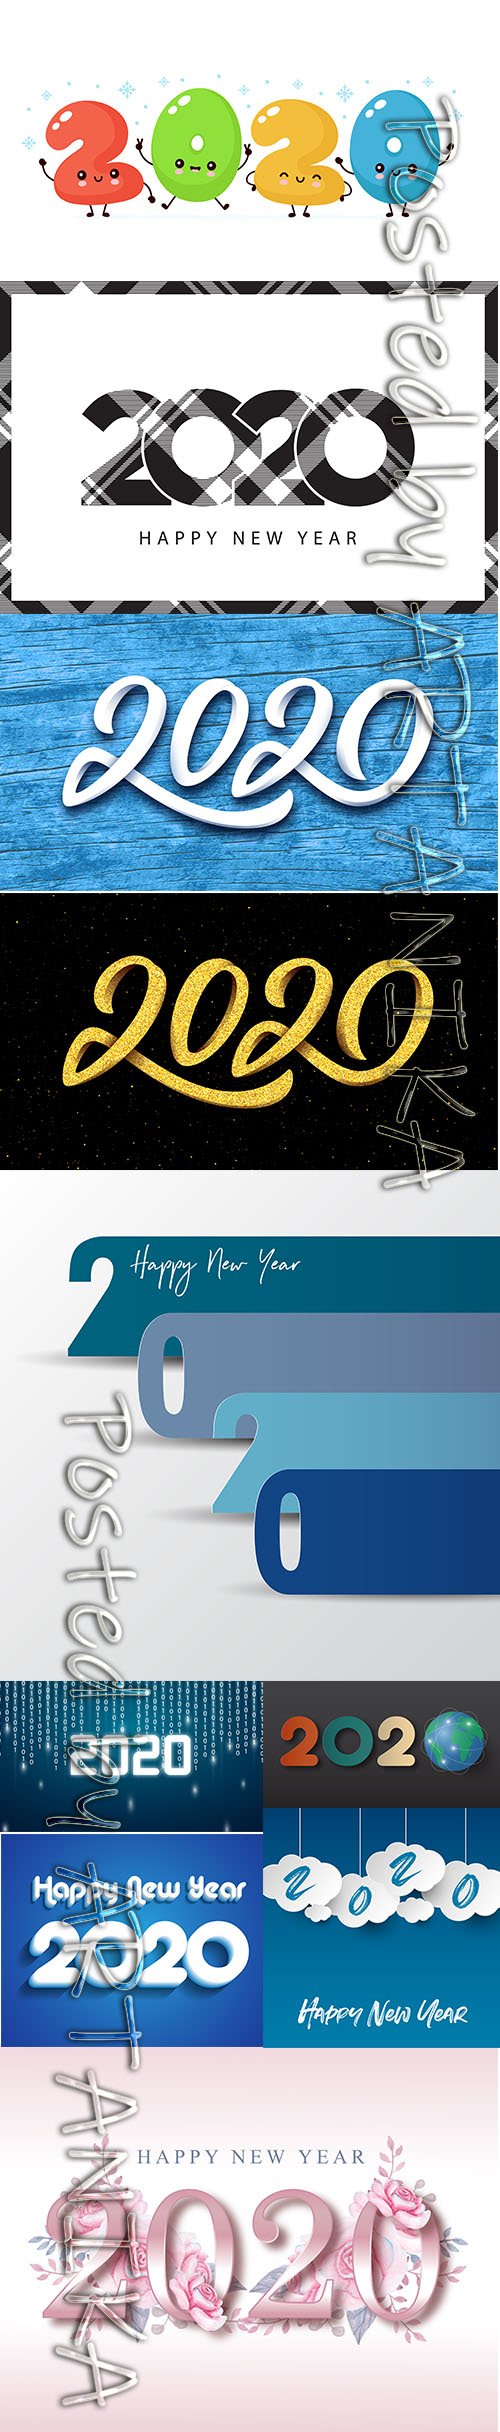 Merry Christmas and New Year 2020 Vector Illustrations Pack Vol 12